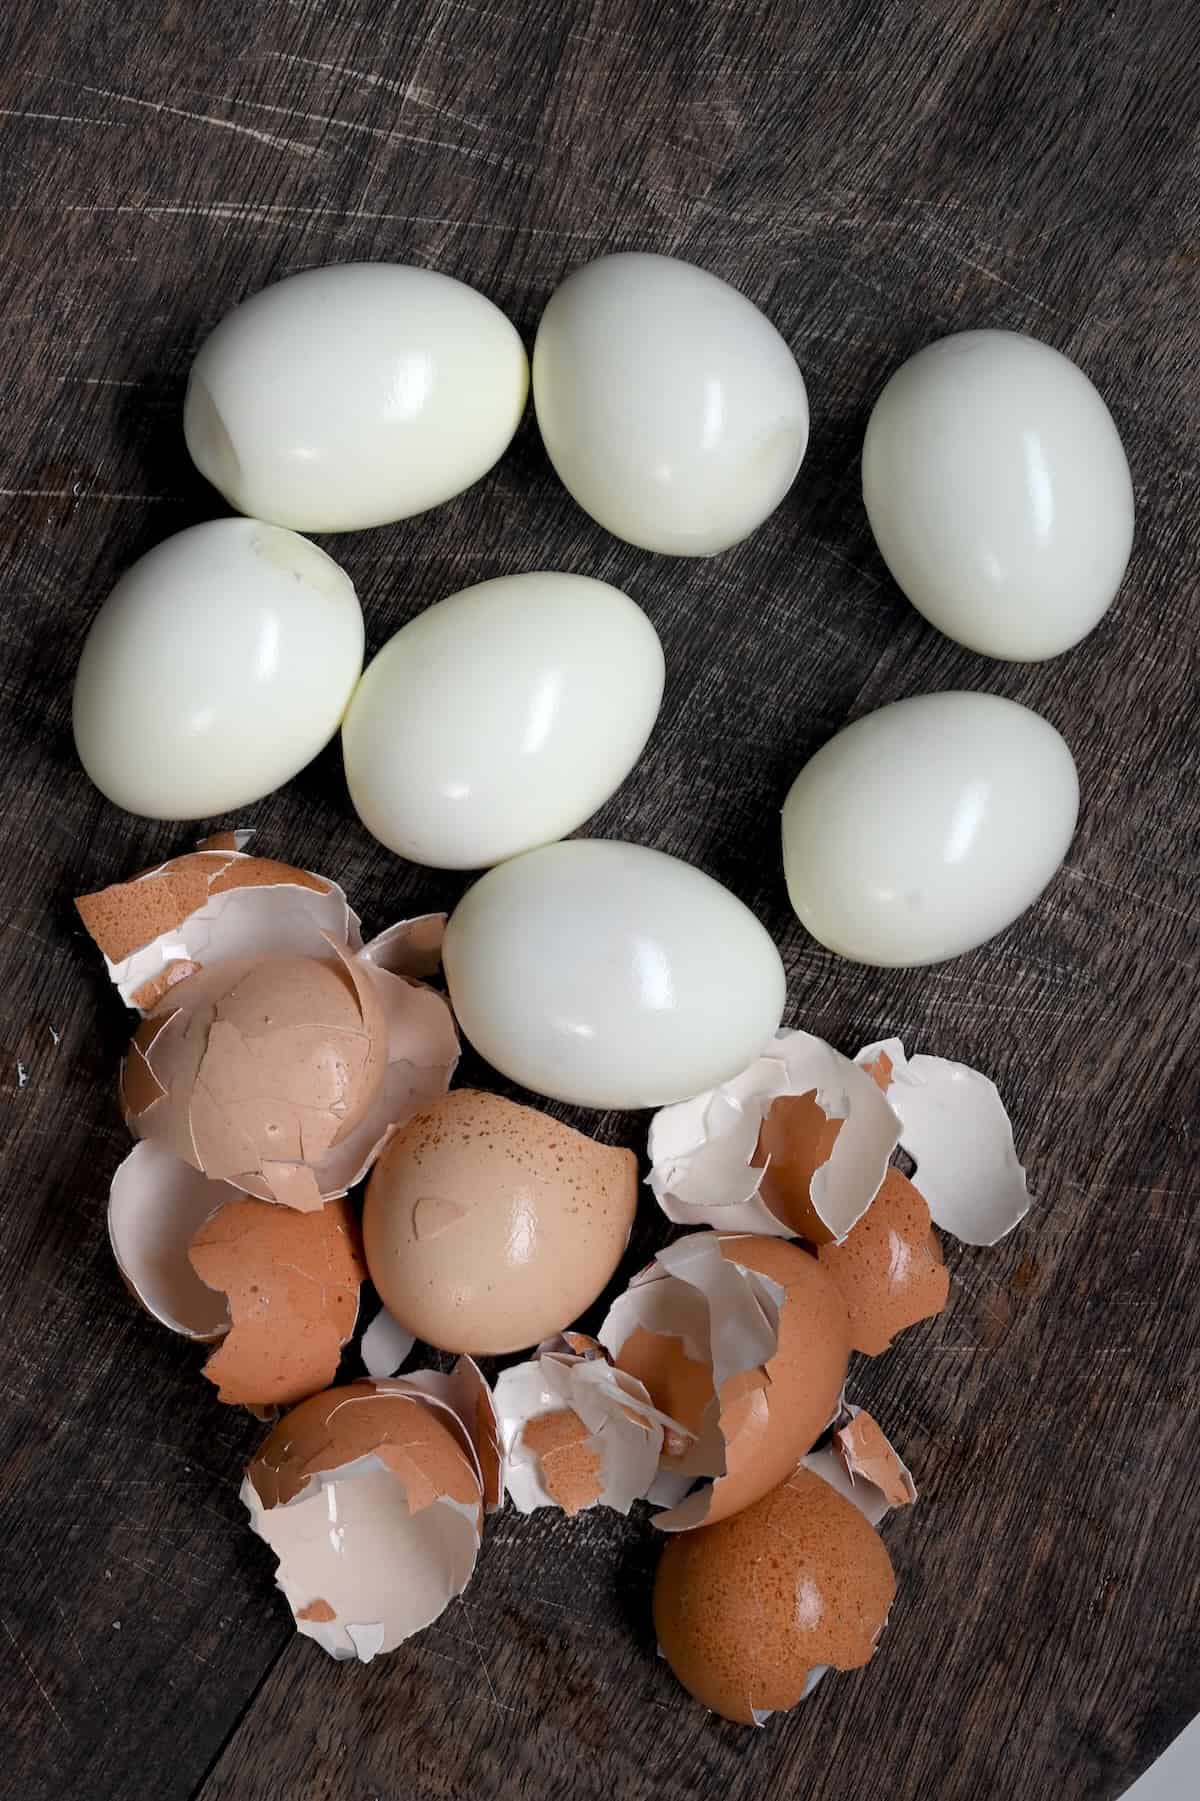 What Is the Best Way to Peel a Hard-Boiled Egg?